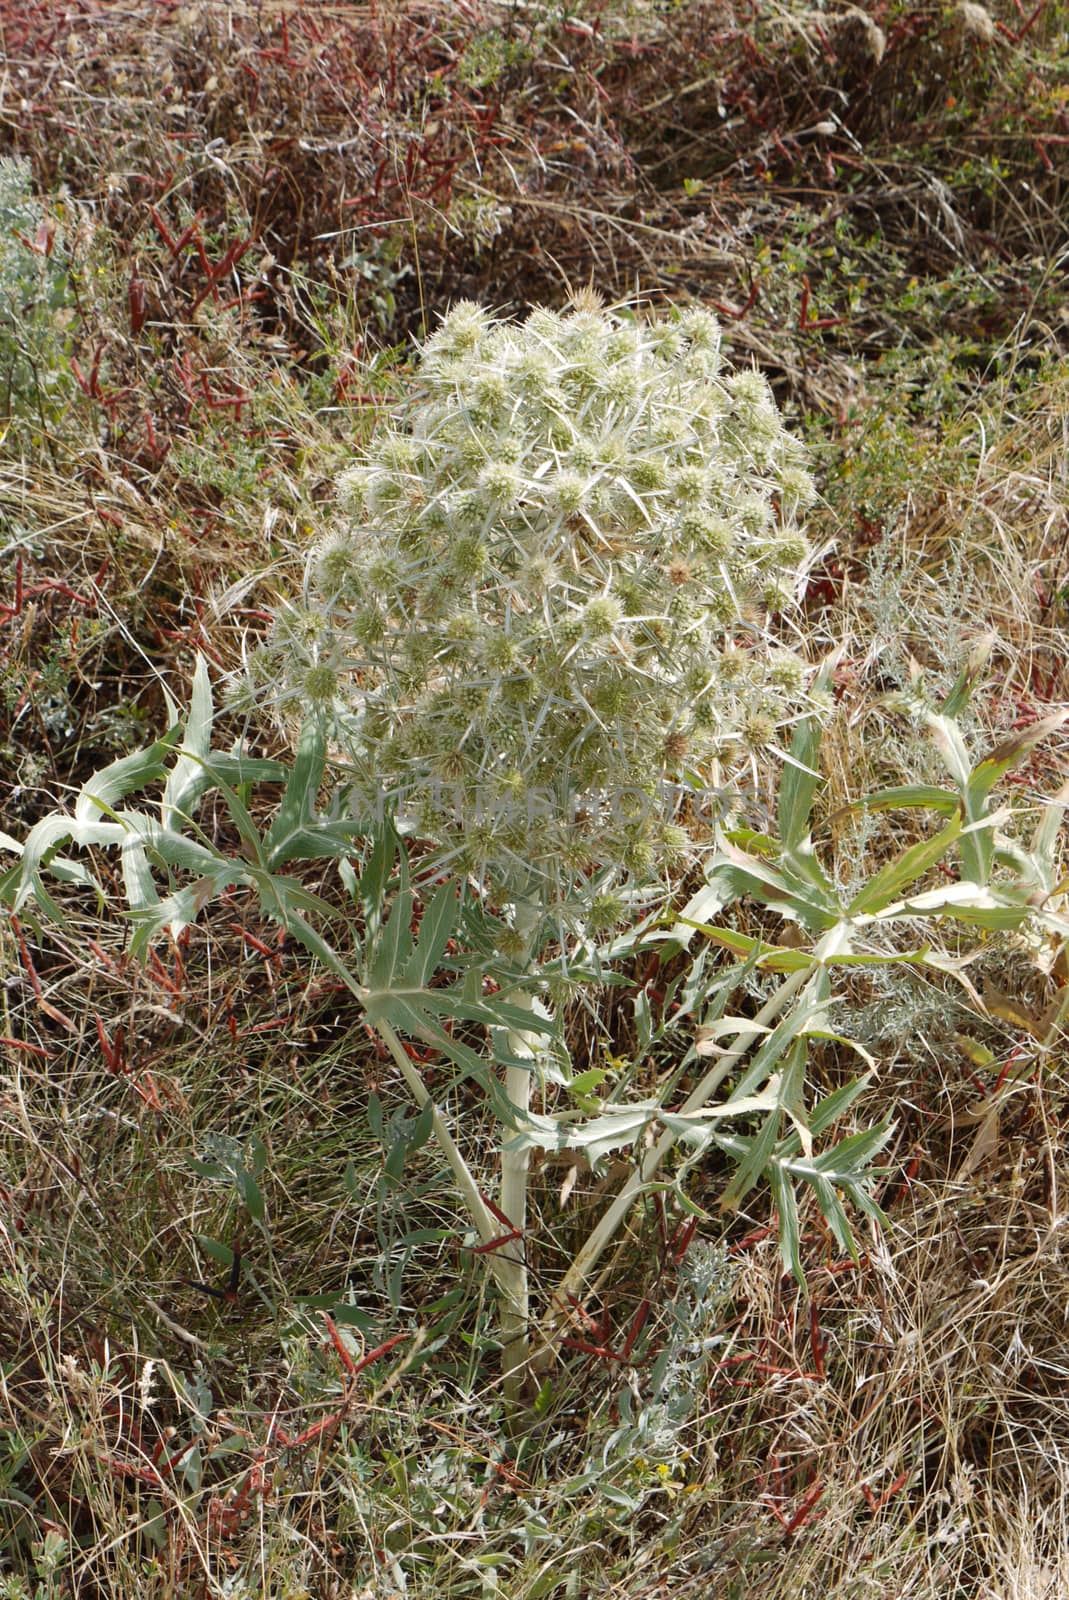 a plant with silver spiny inflorescence among dry grassy herbs